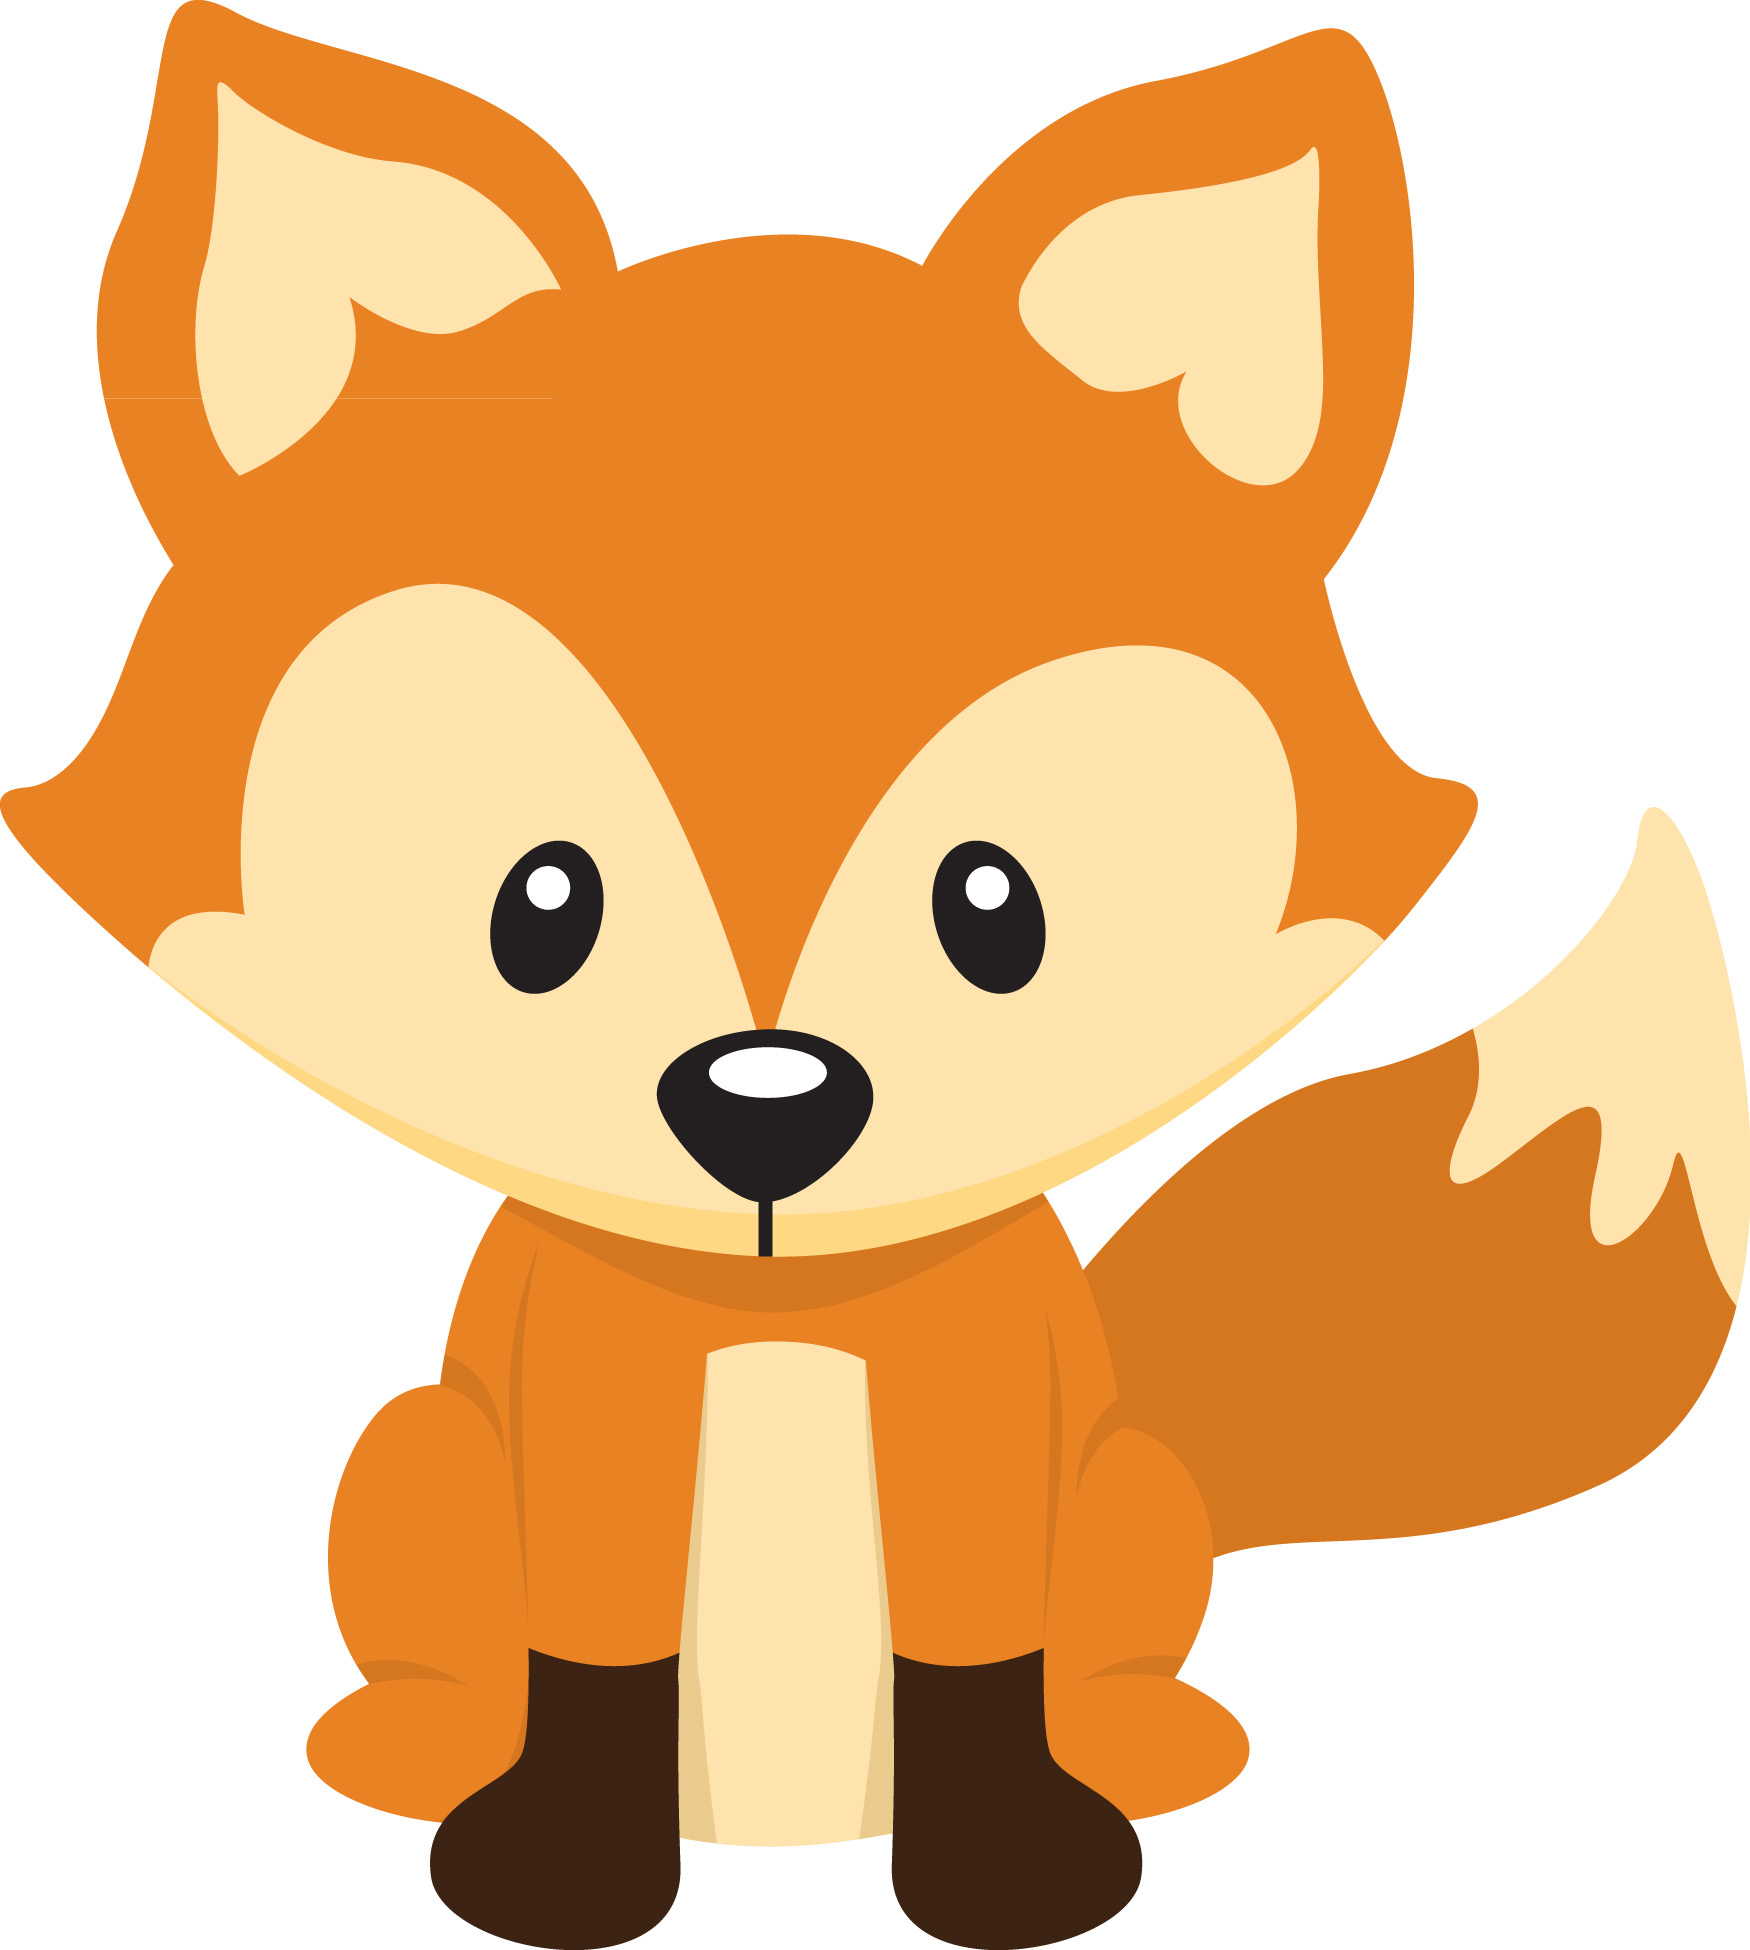 Fox free images at vector clip art online royalty